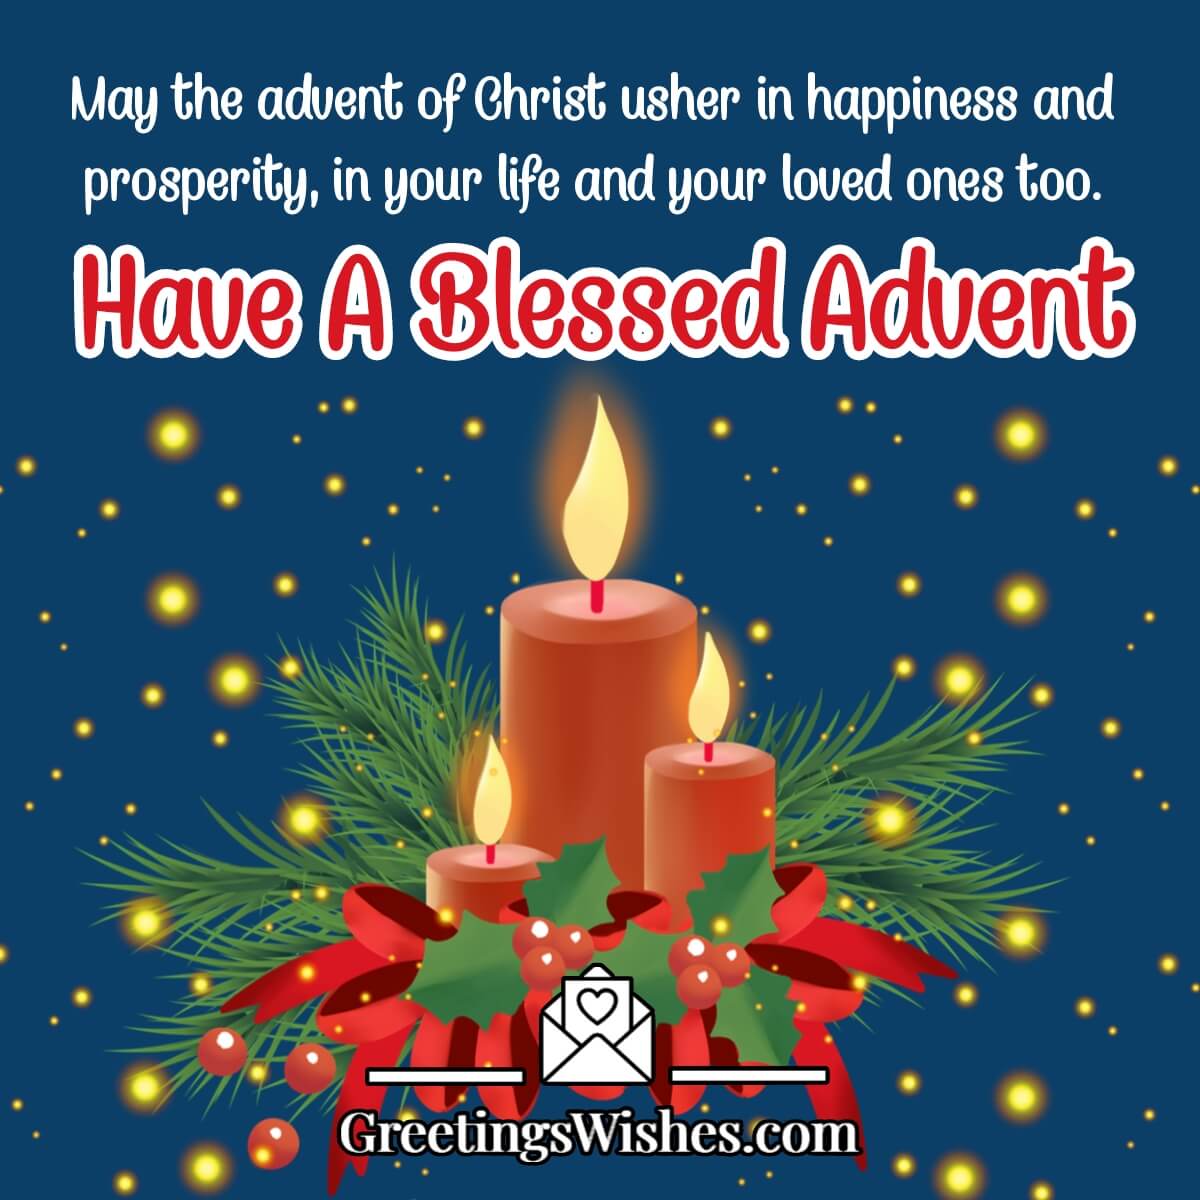 Have A Blessed Advent Wishes